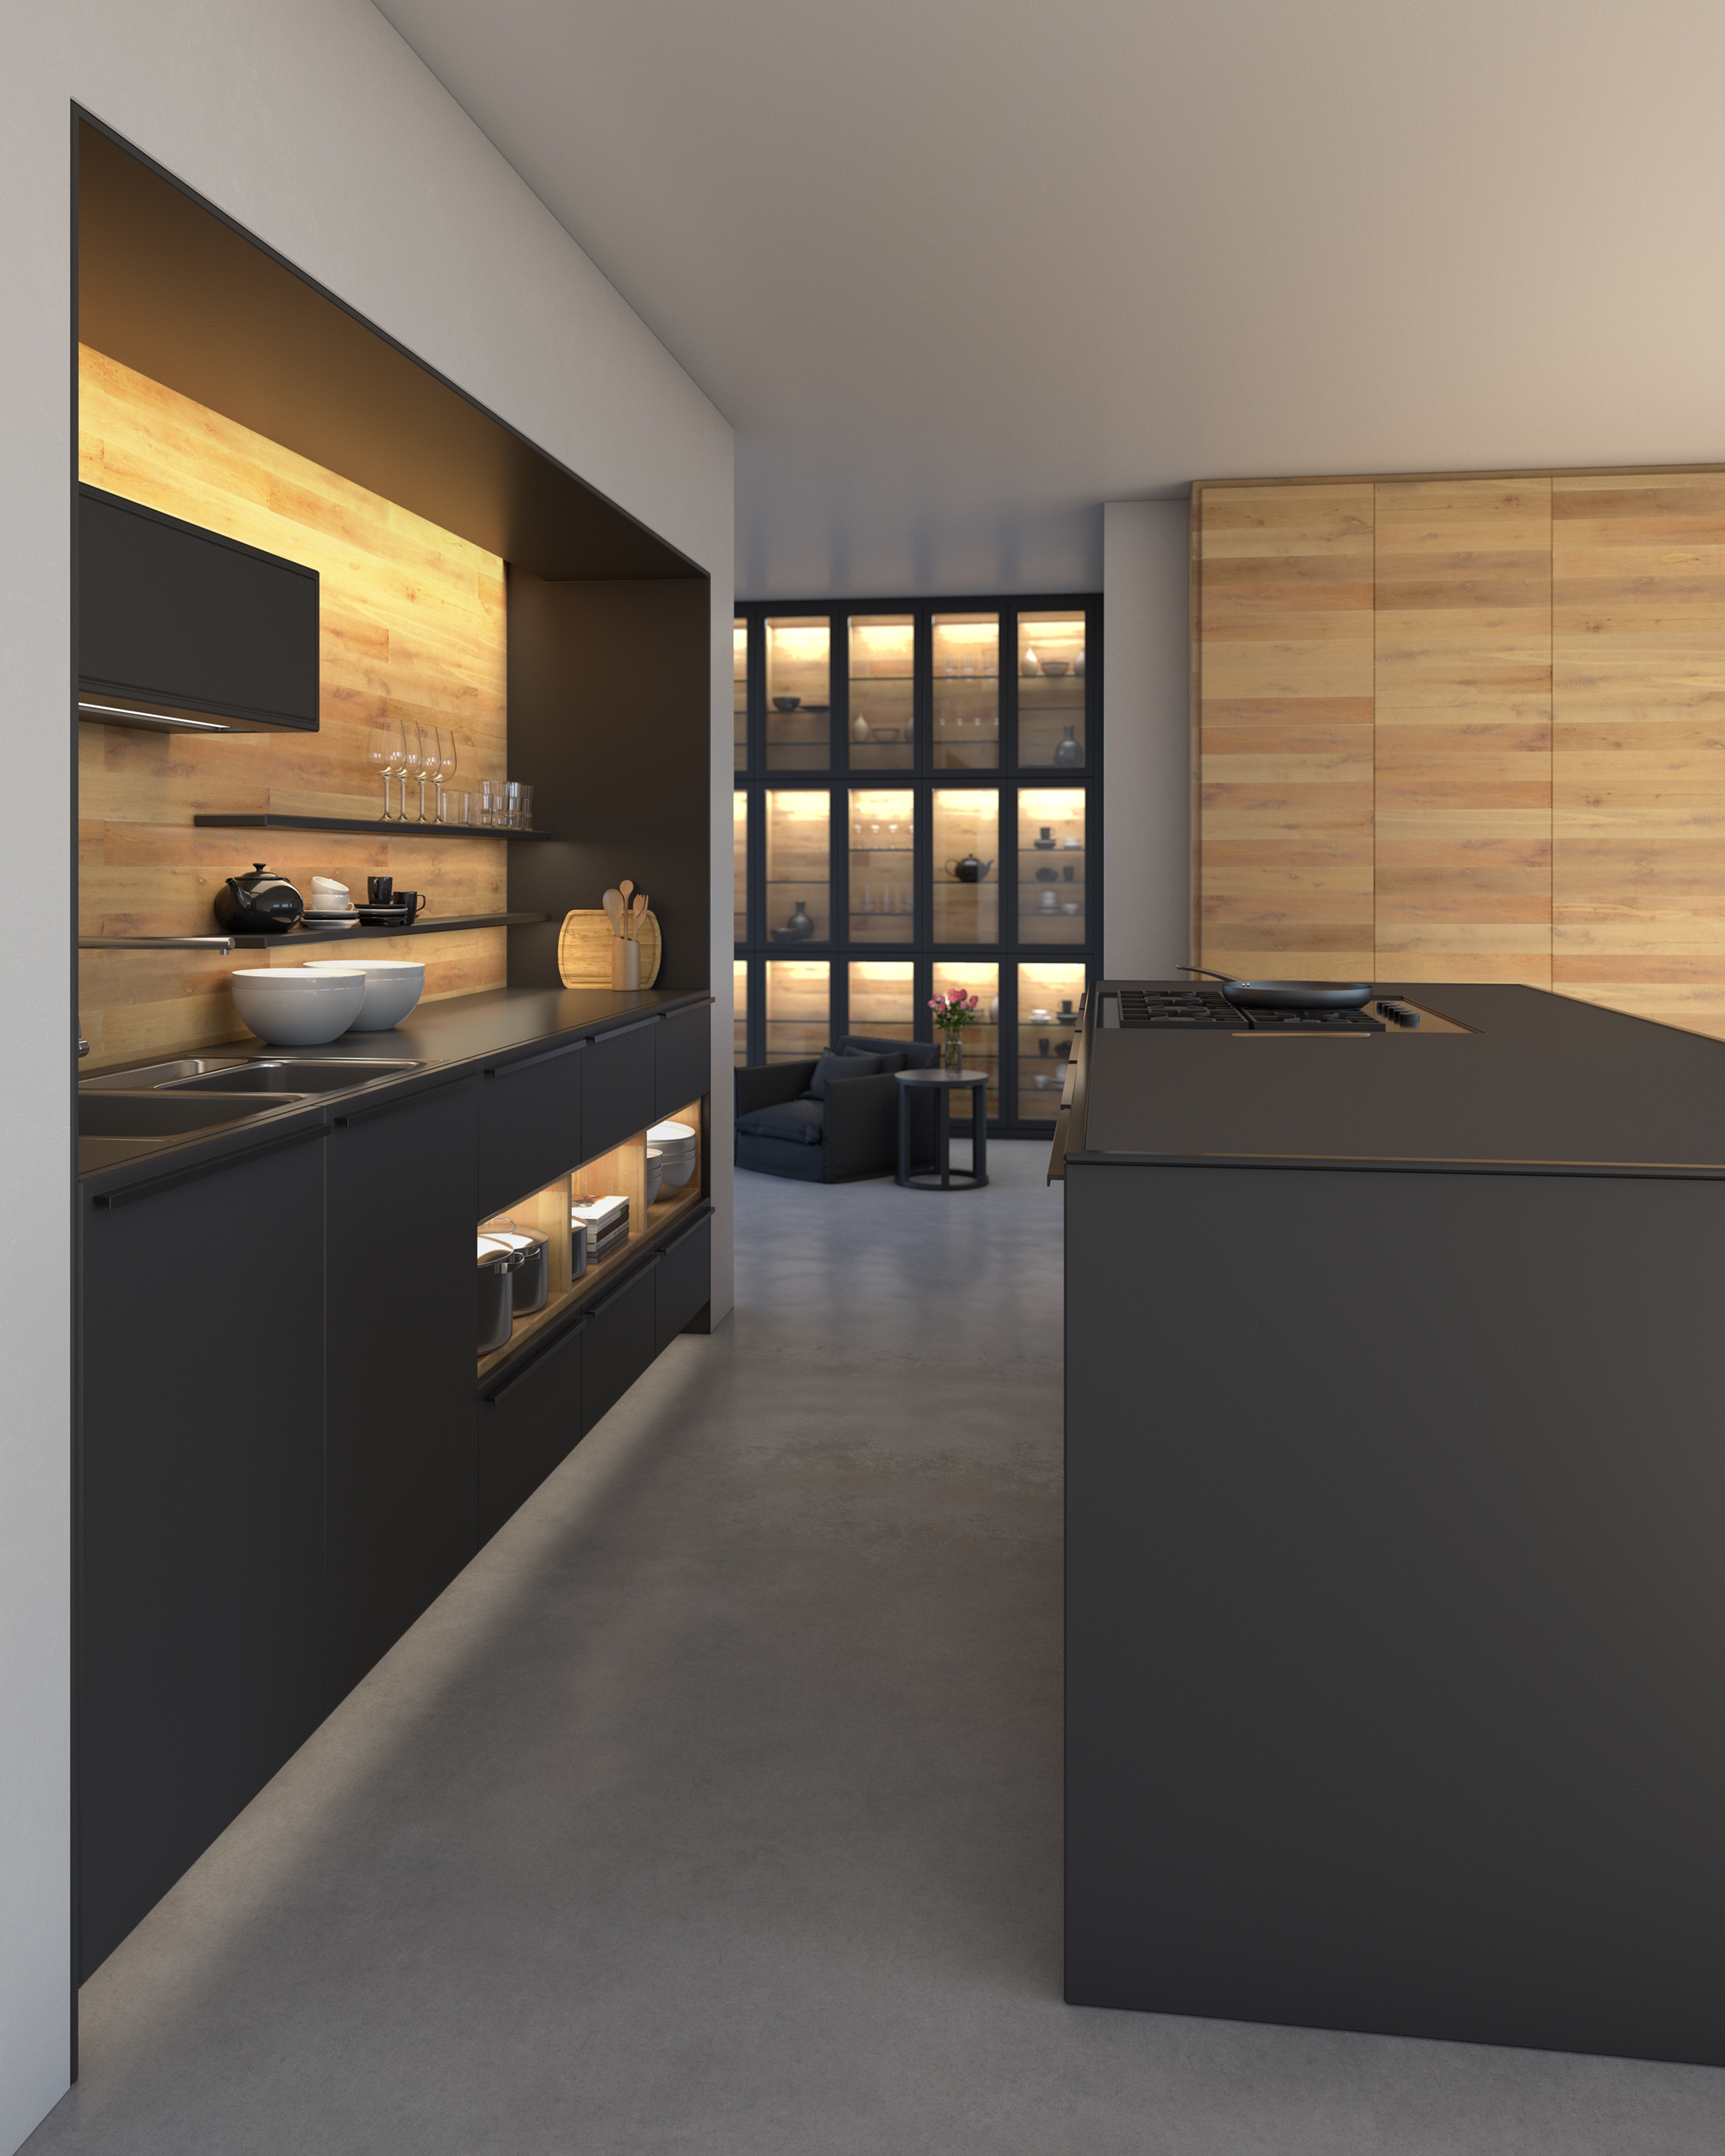 Unilume LED Slimline 31-Inch Undercabinet Light by Visual Comfort Architectural in a kitchen.